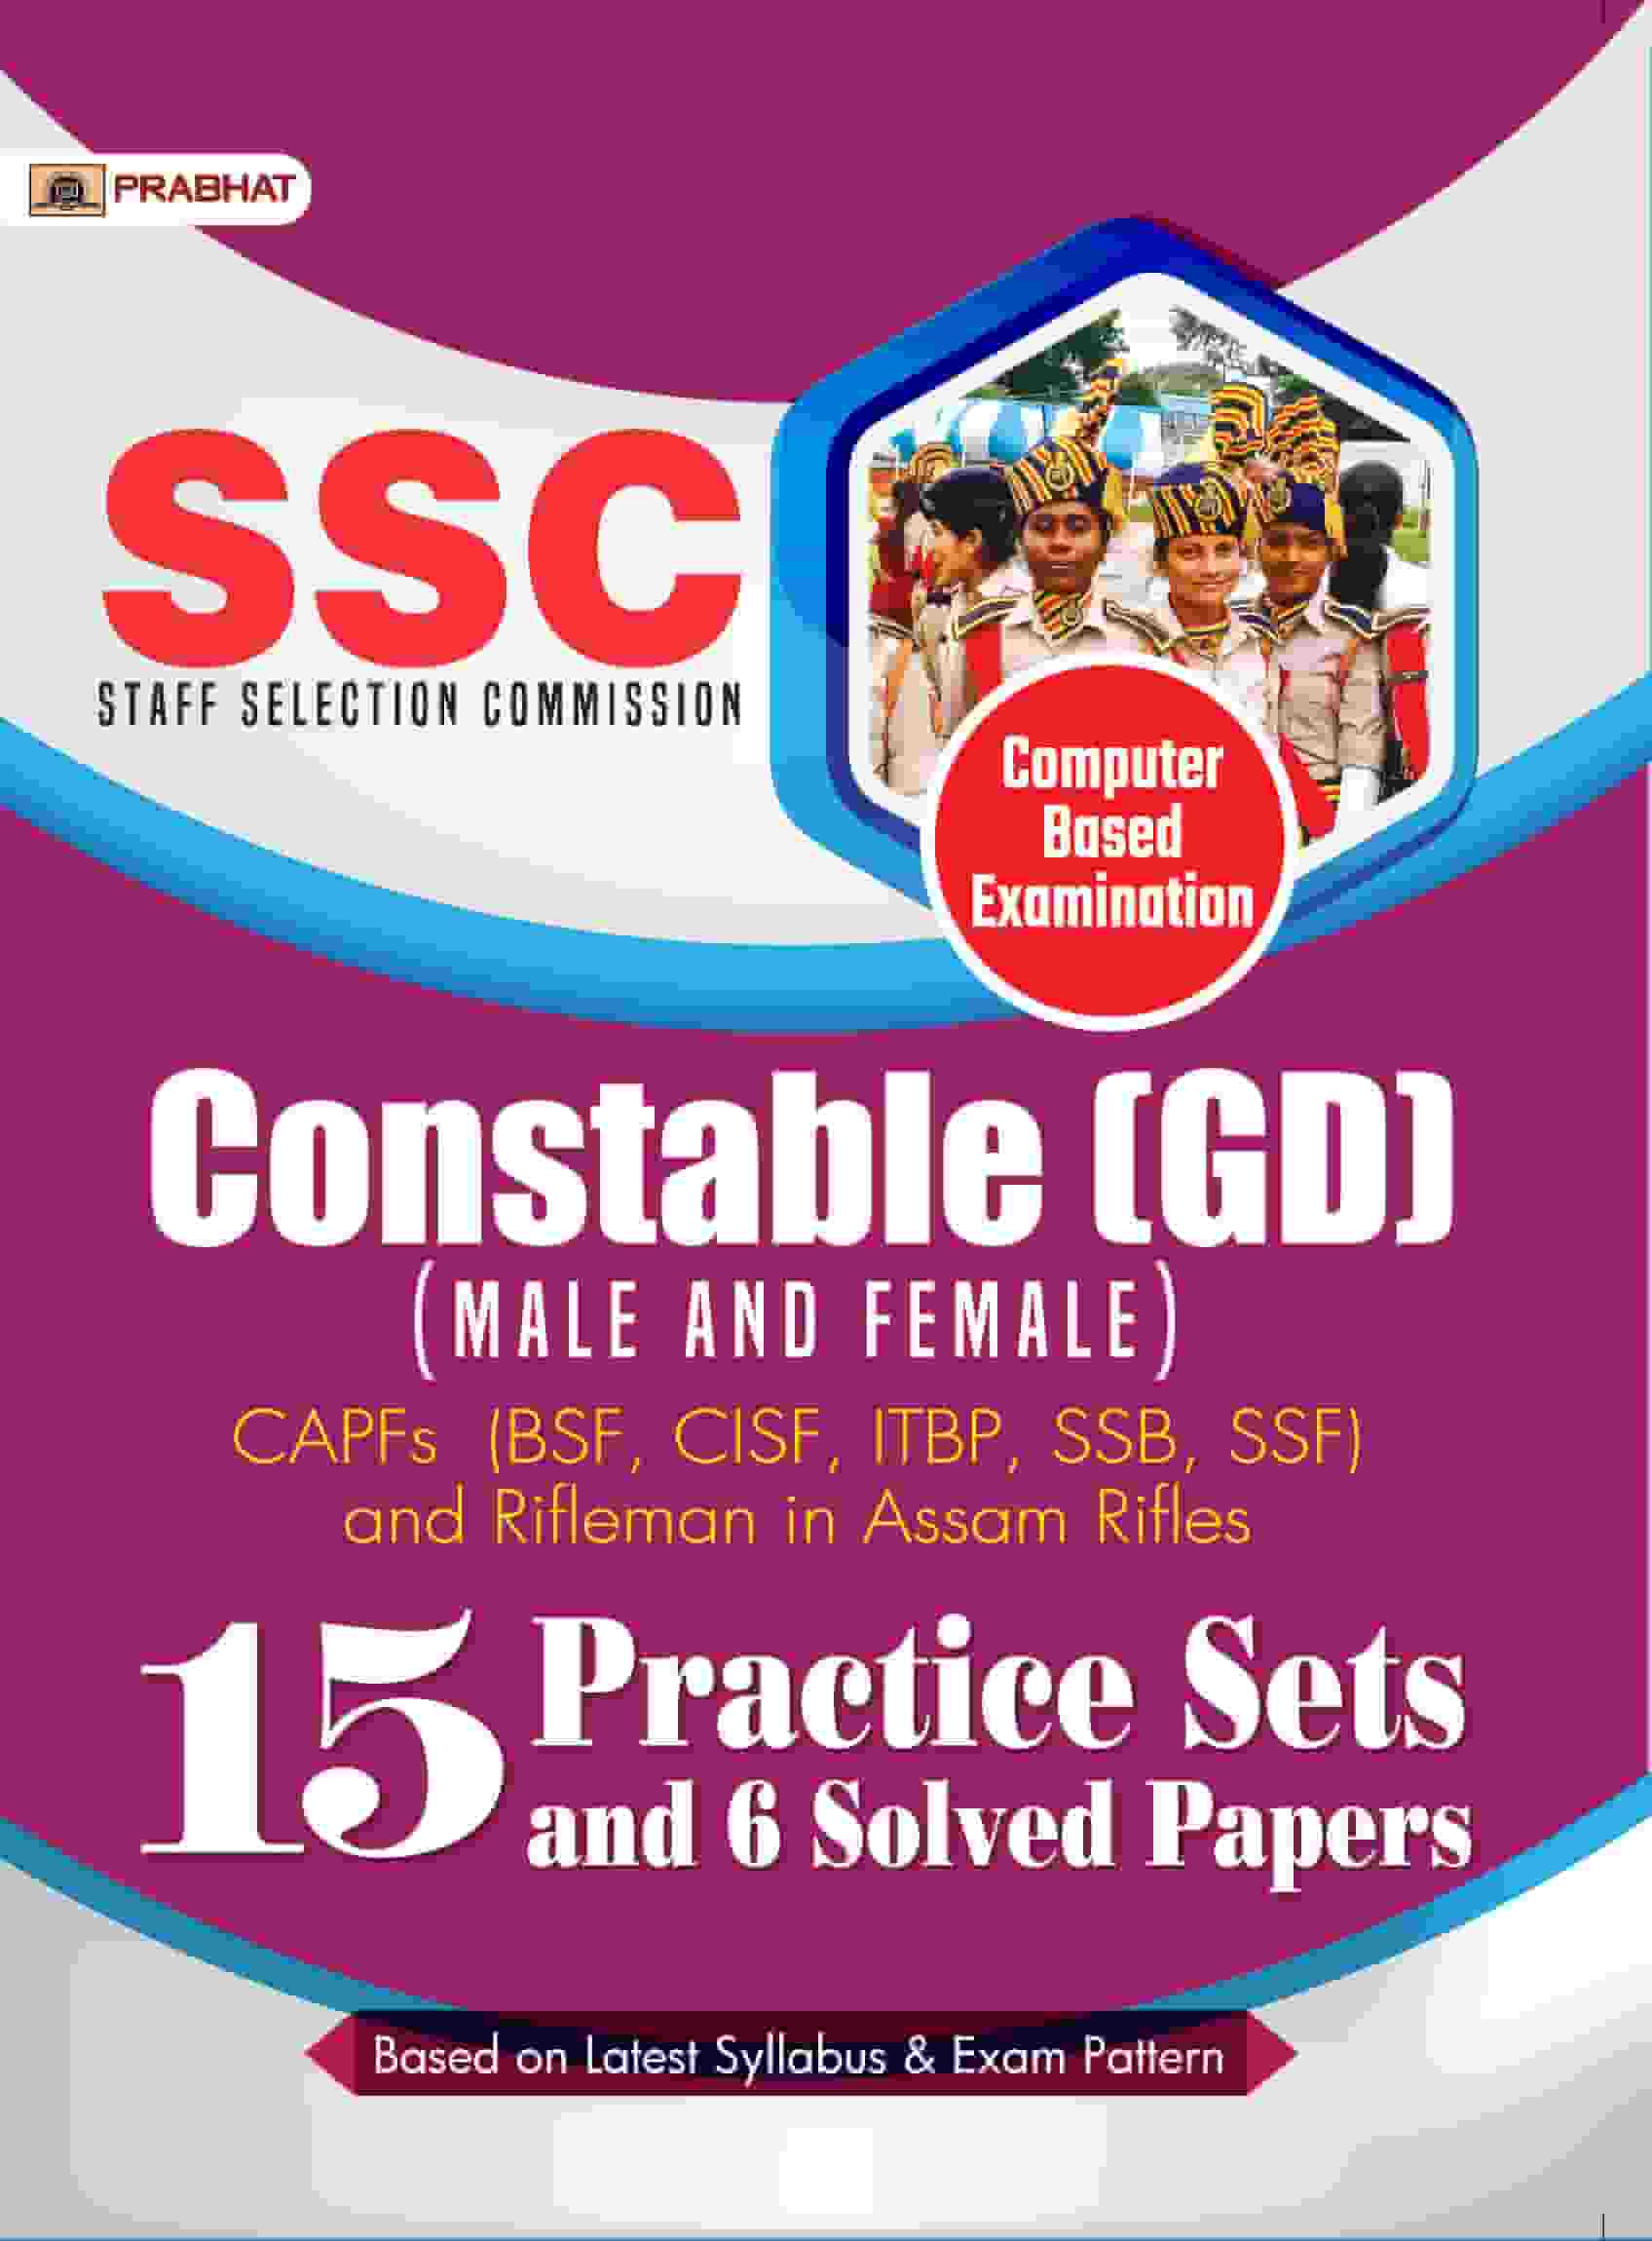 SSC Staff Selection Commission Constable (GD) (Male and Female) Computer Based Examination (15 Practice Sets) 